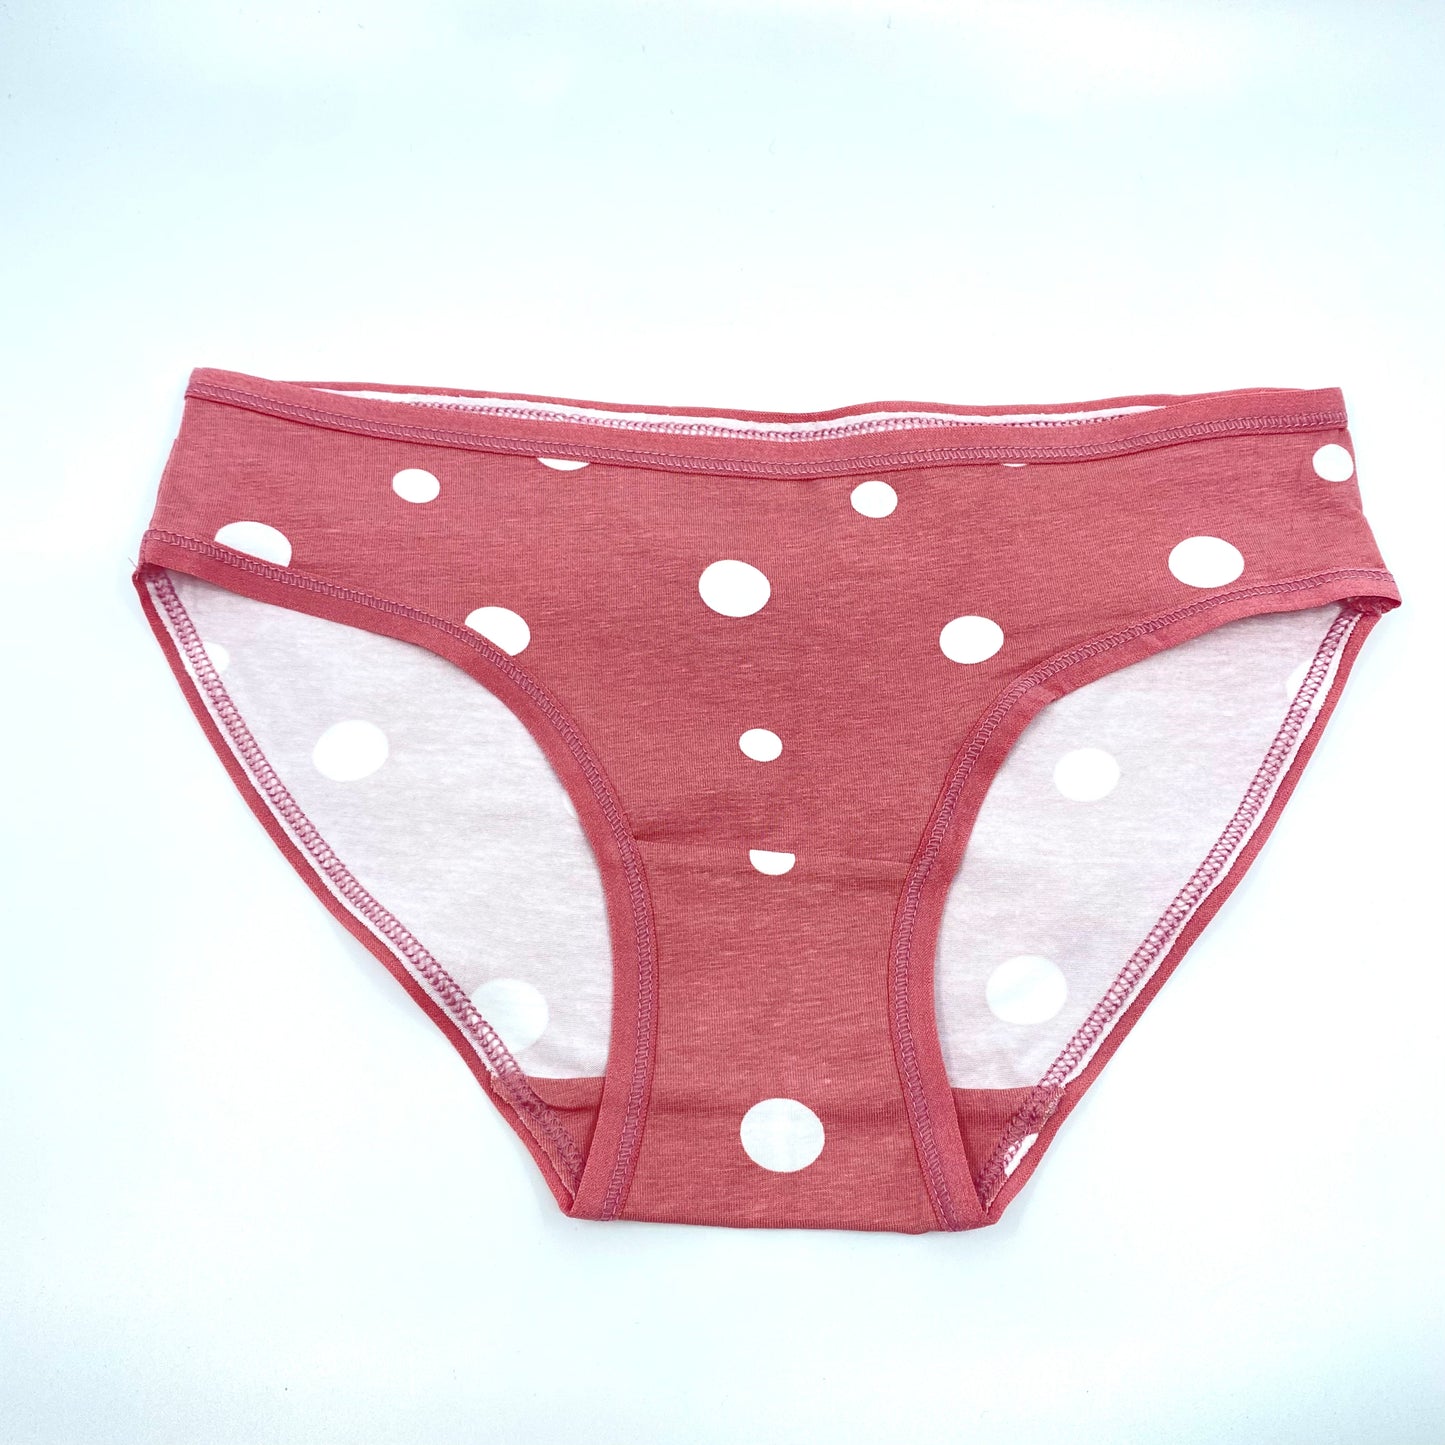 Girls' organic cotton knickers - pink with white dots